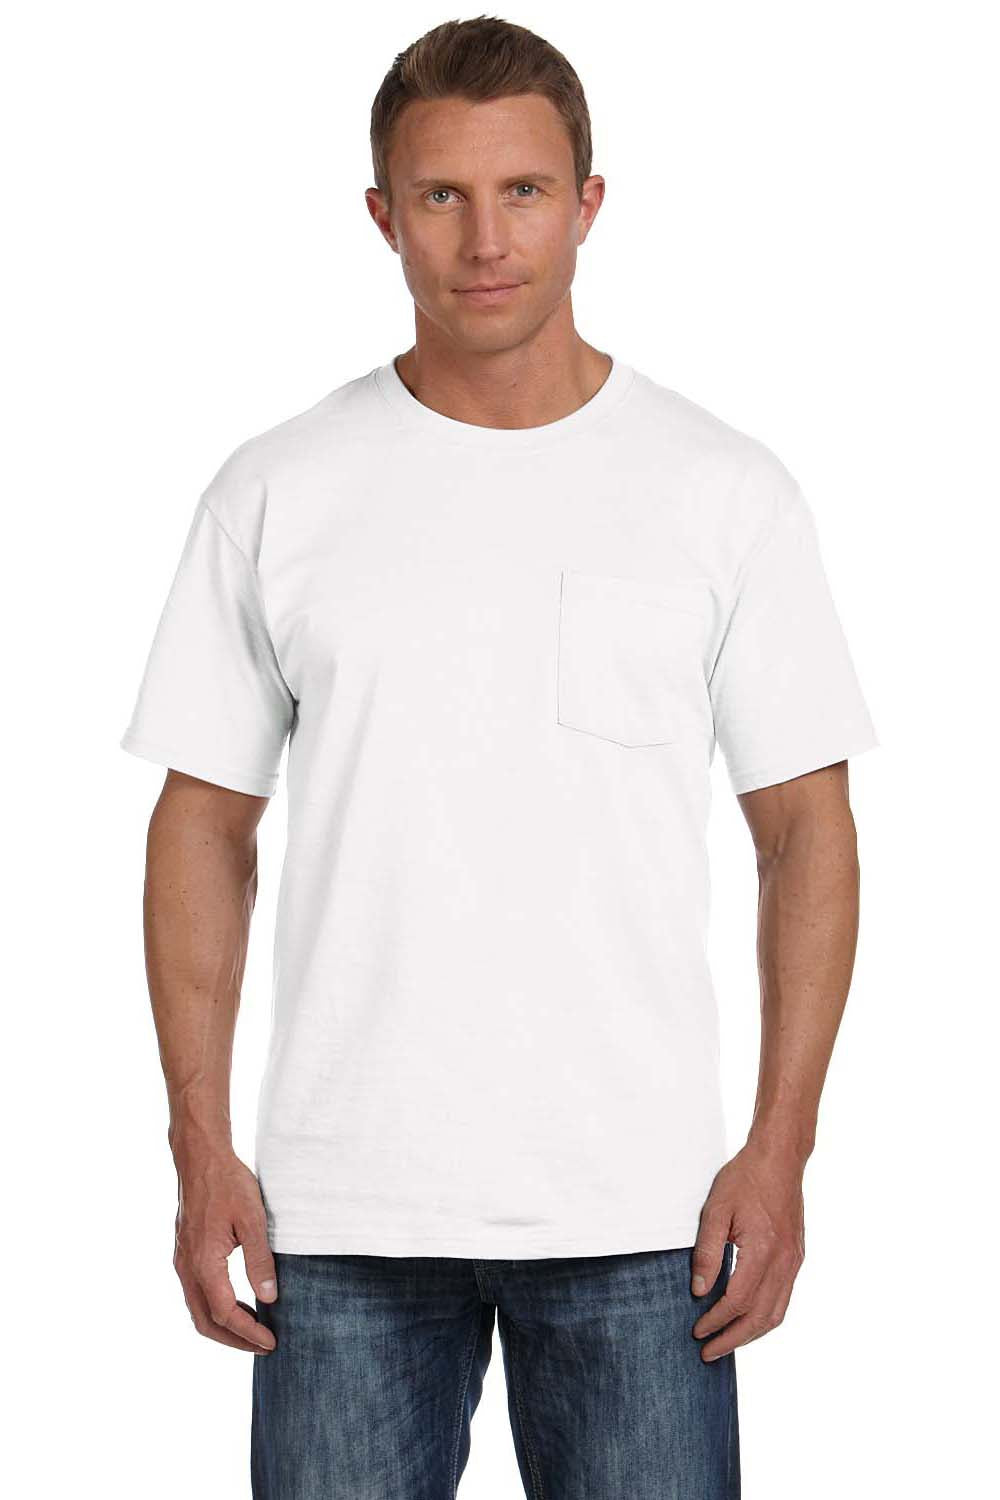 Fruit Of The Loom 3931P Mens HD Jersey Short Sleeve Crewneck T-Shirt w/ Pocket White Front